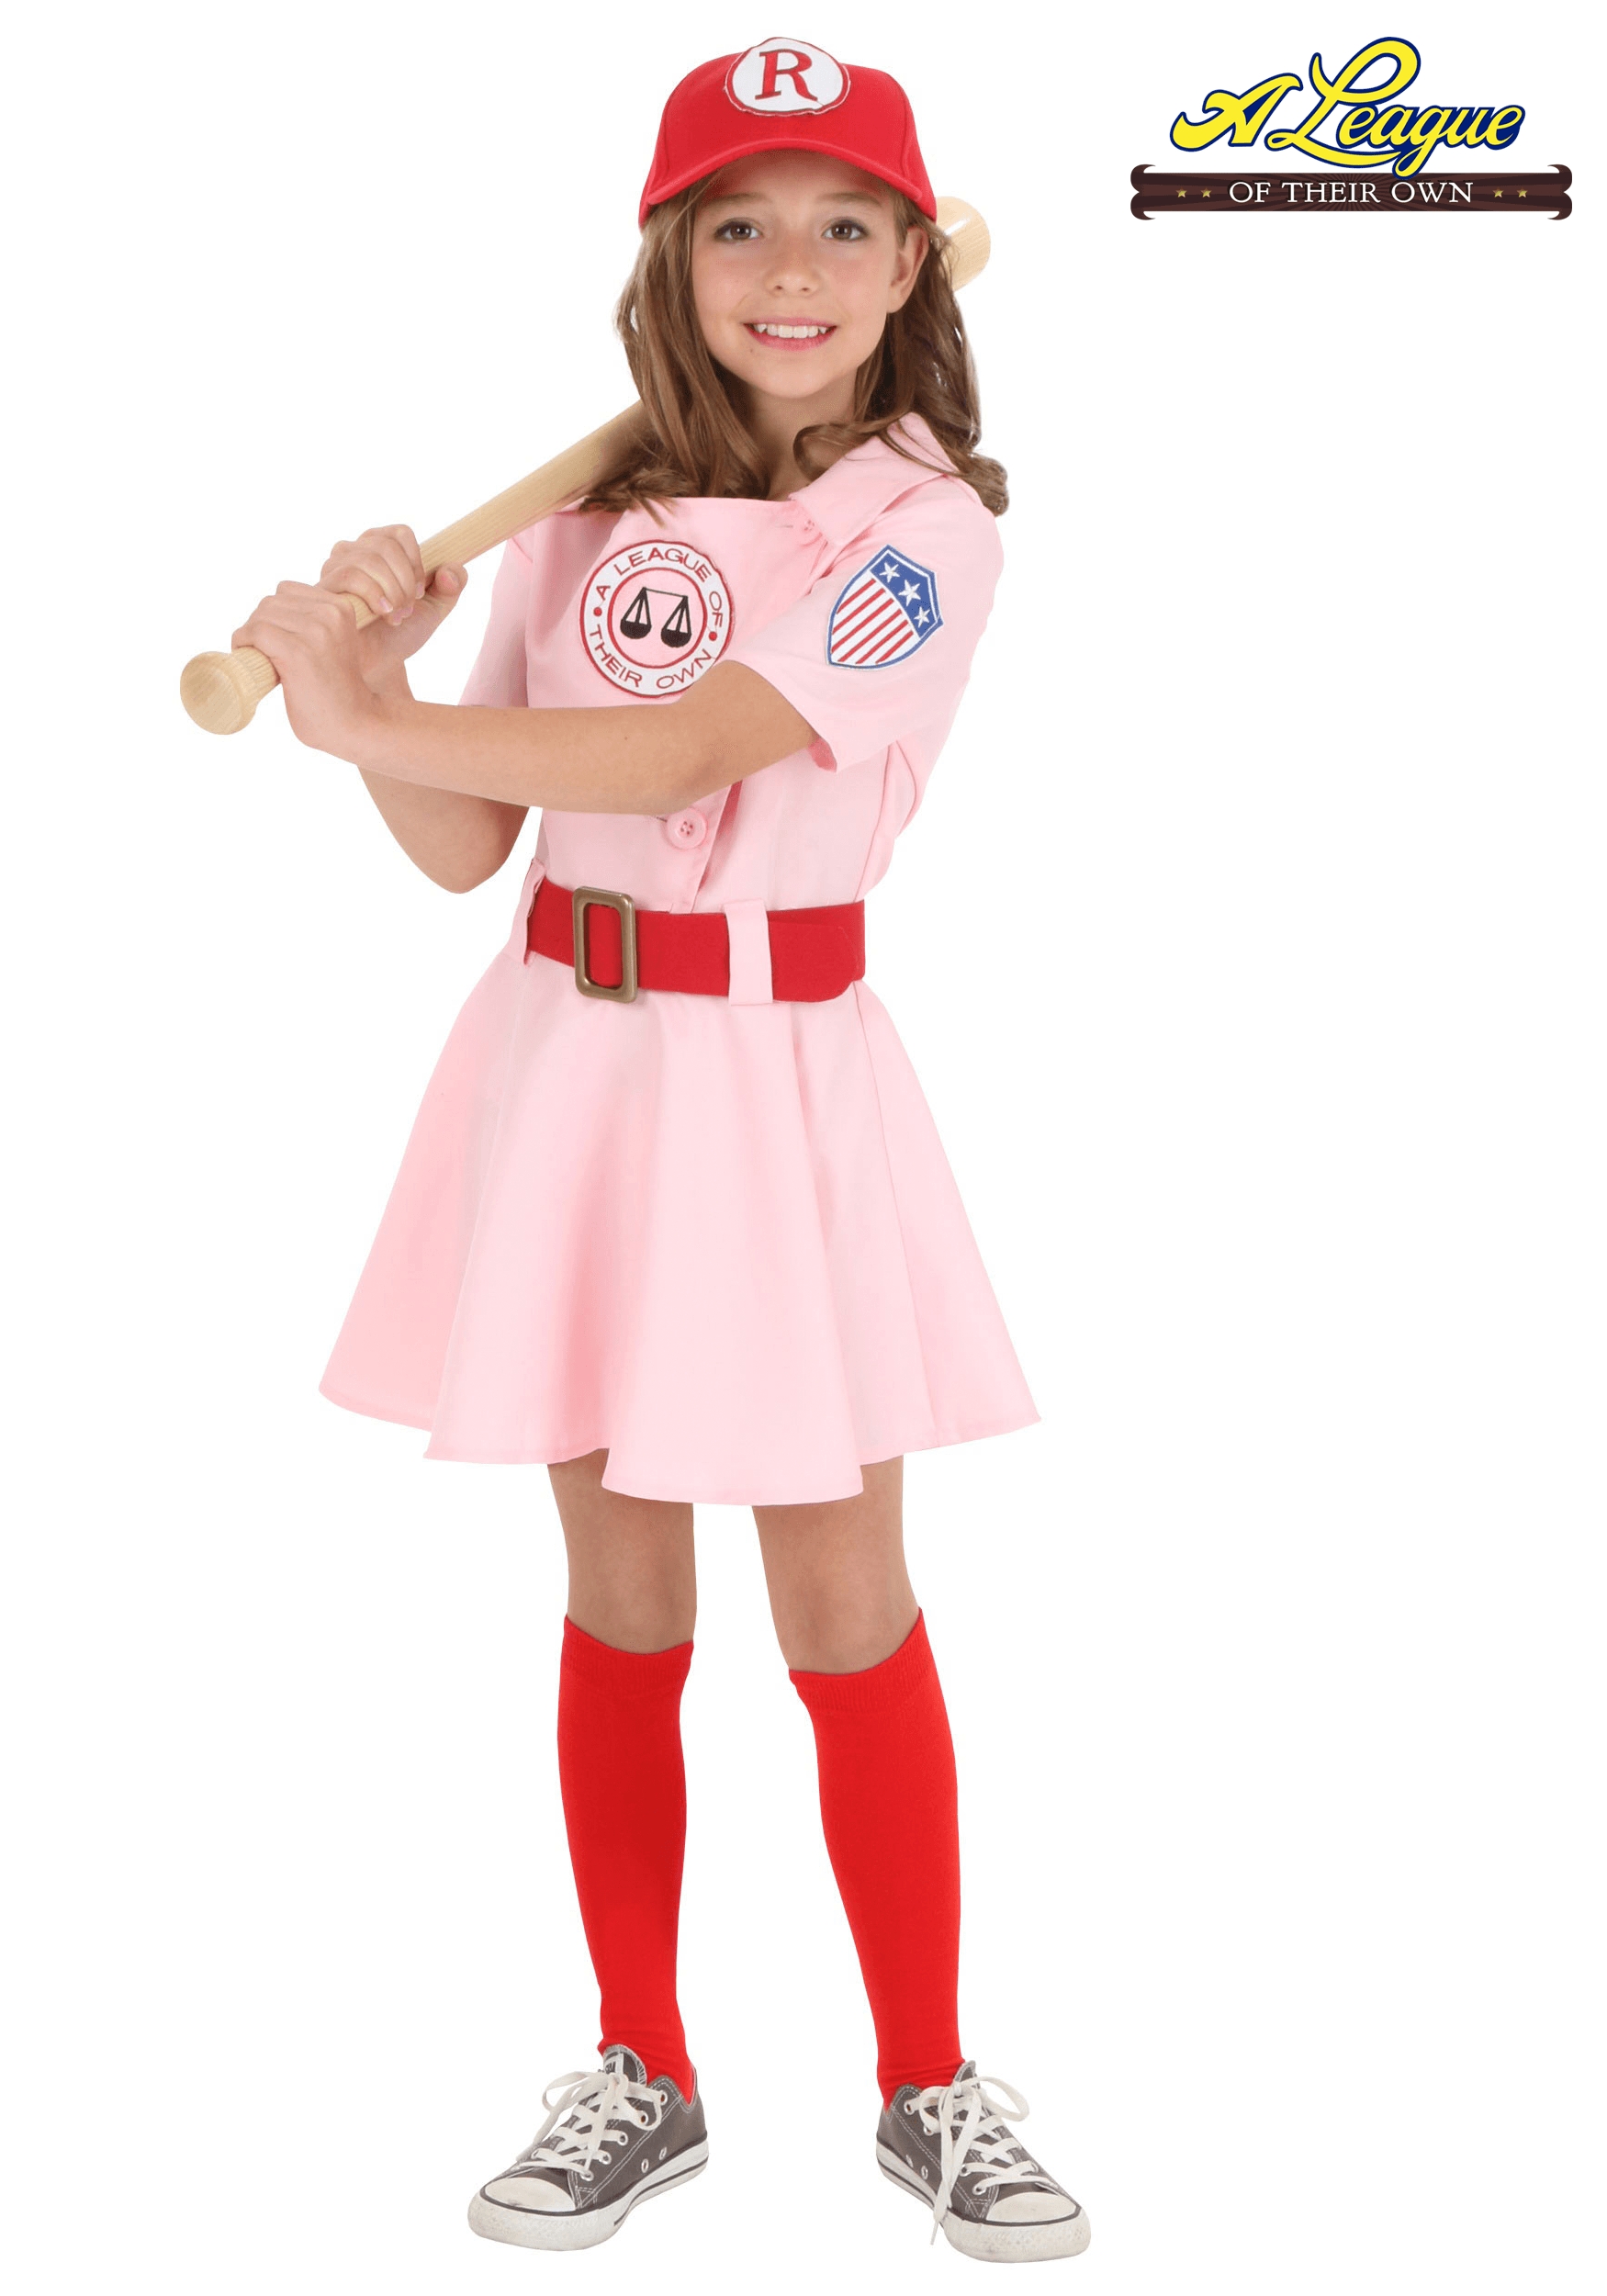 10 Unique Halloween Costume Ideas For Girls Age 10 sports halloween costumes uniforms halloweencostumes 2022